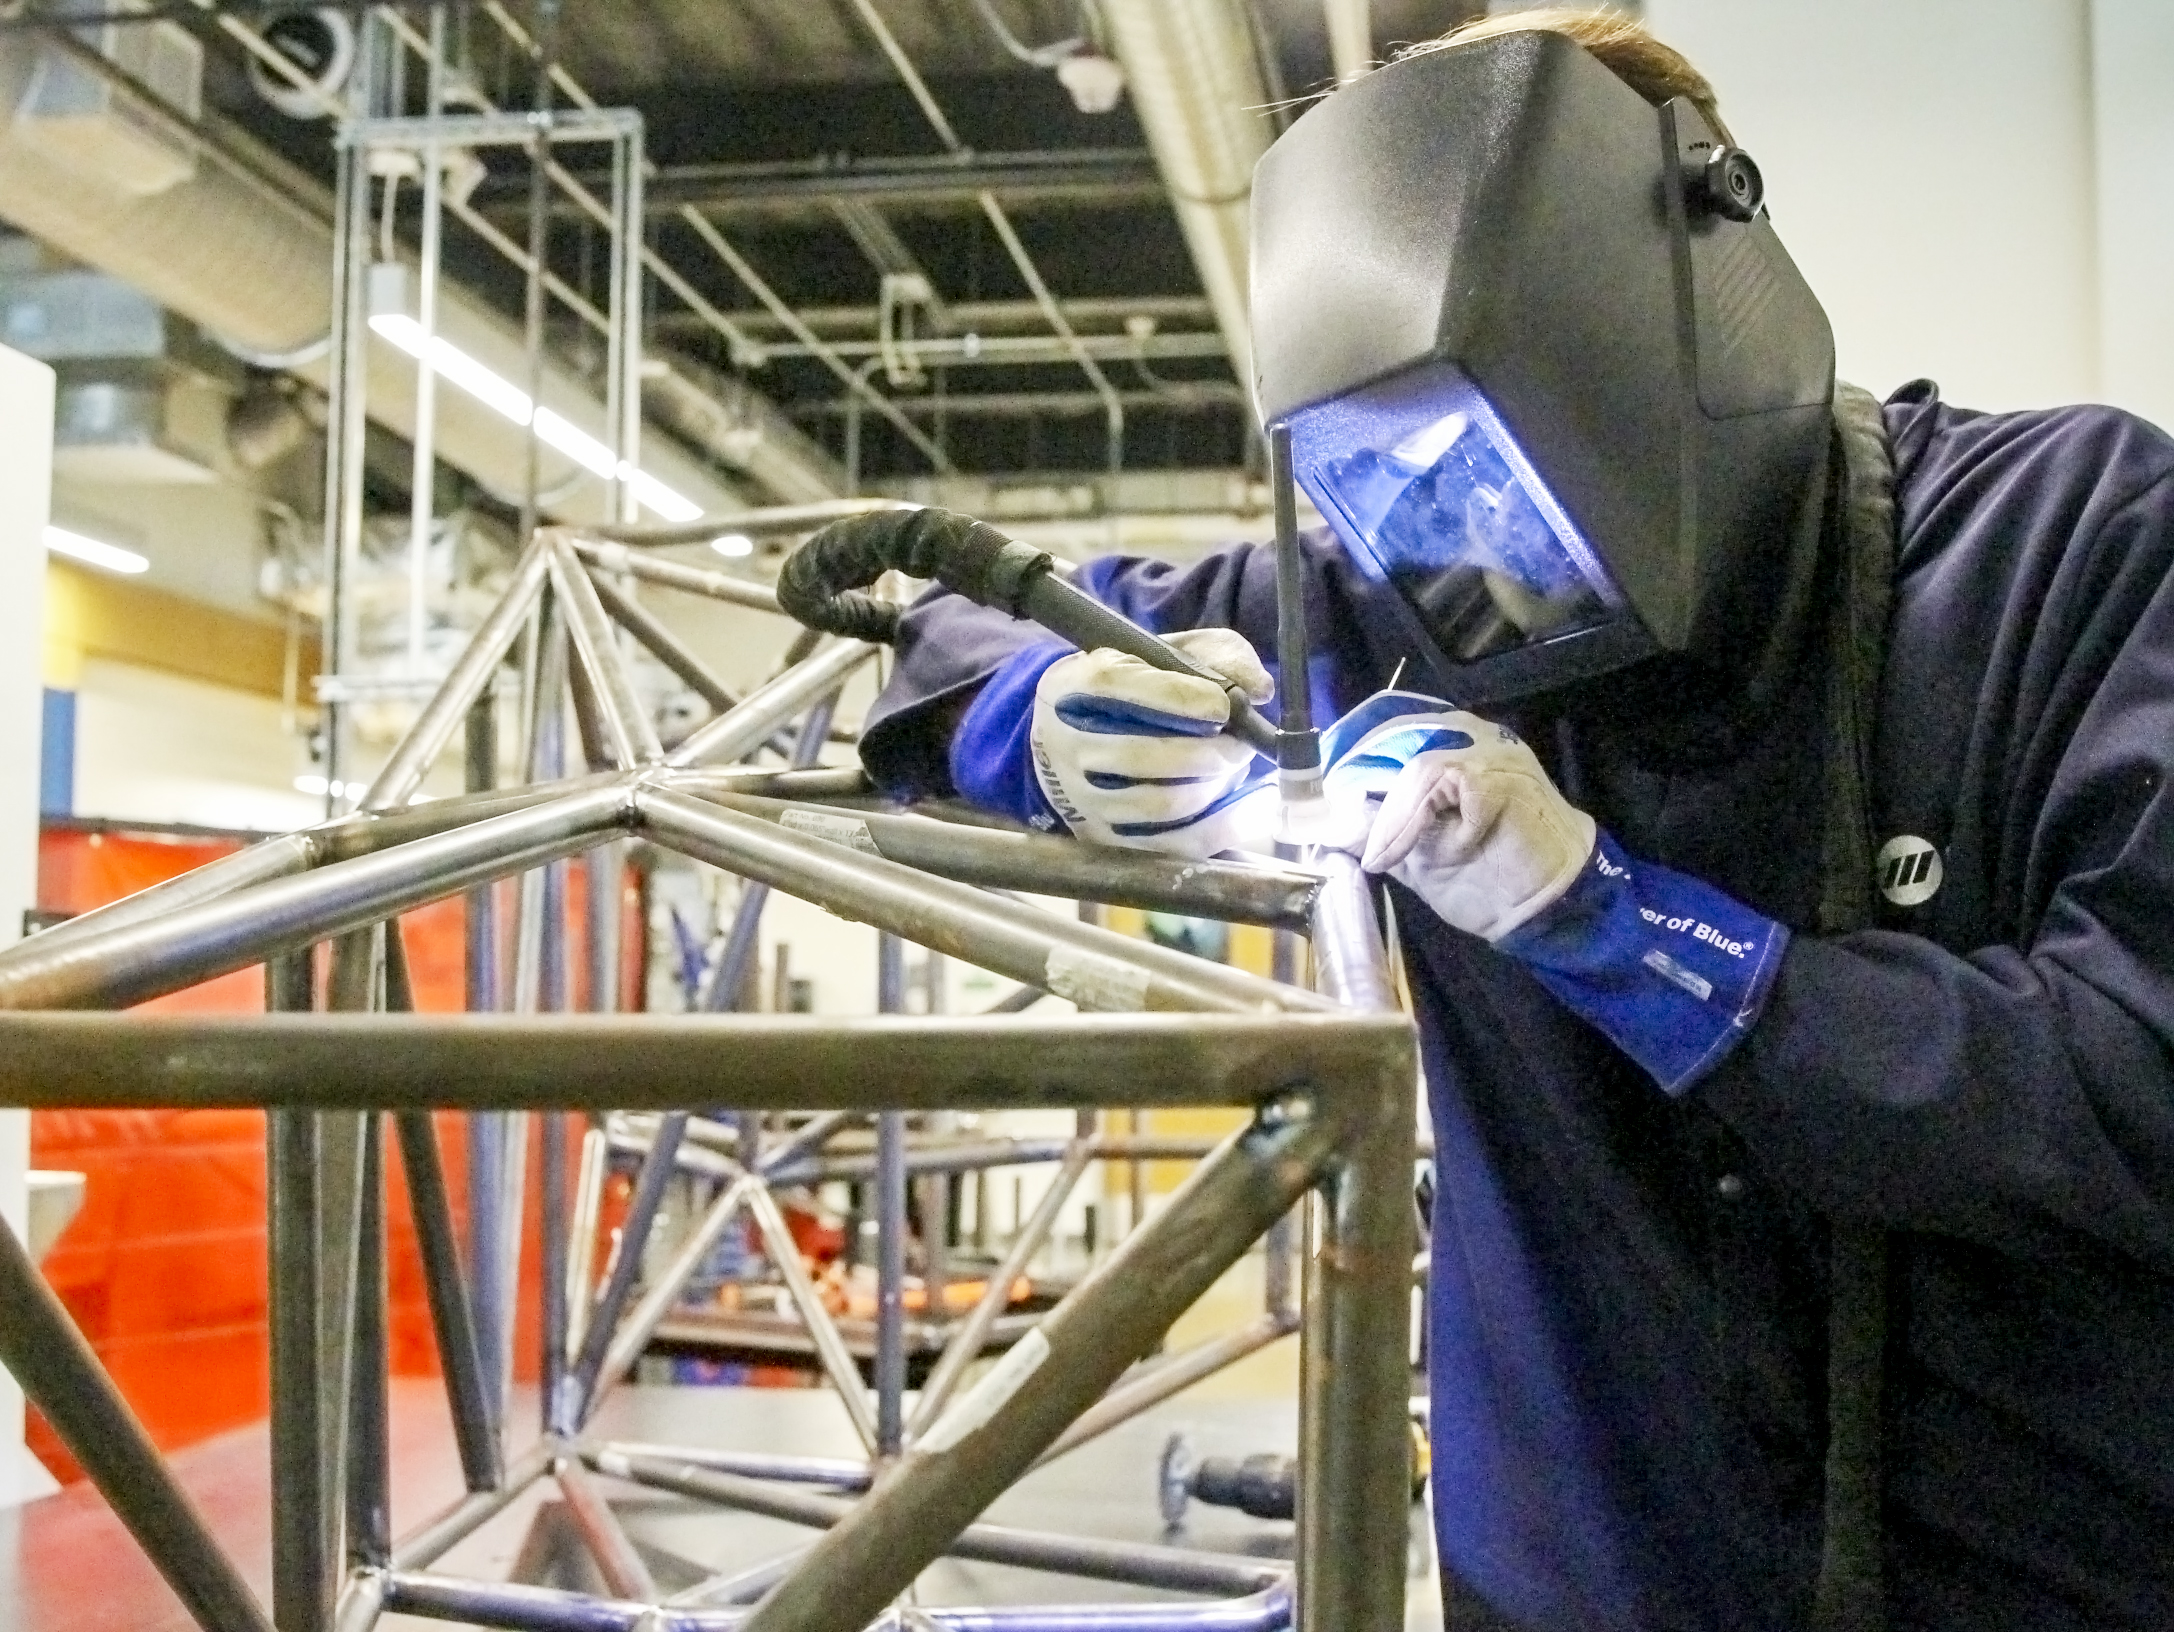 A student in a welding mask and gloves welding a car frame